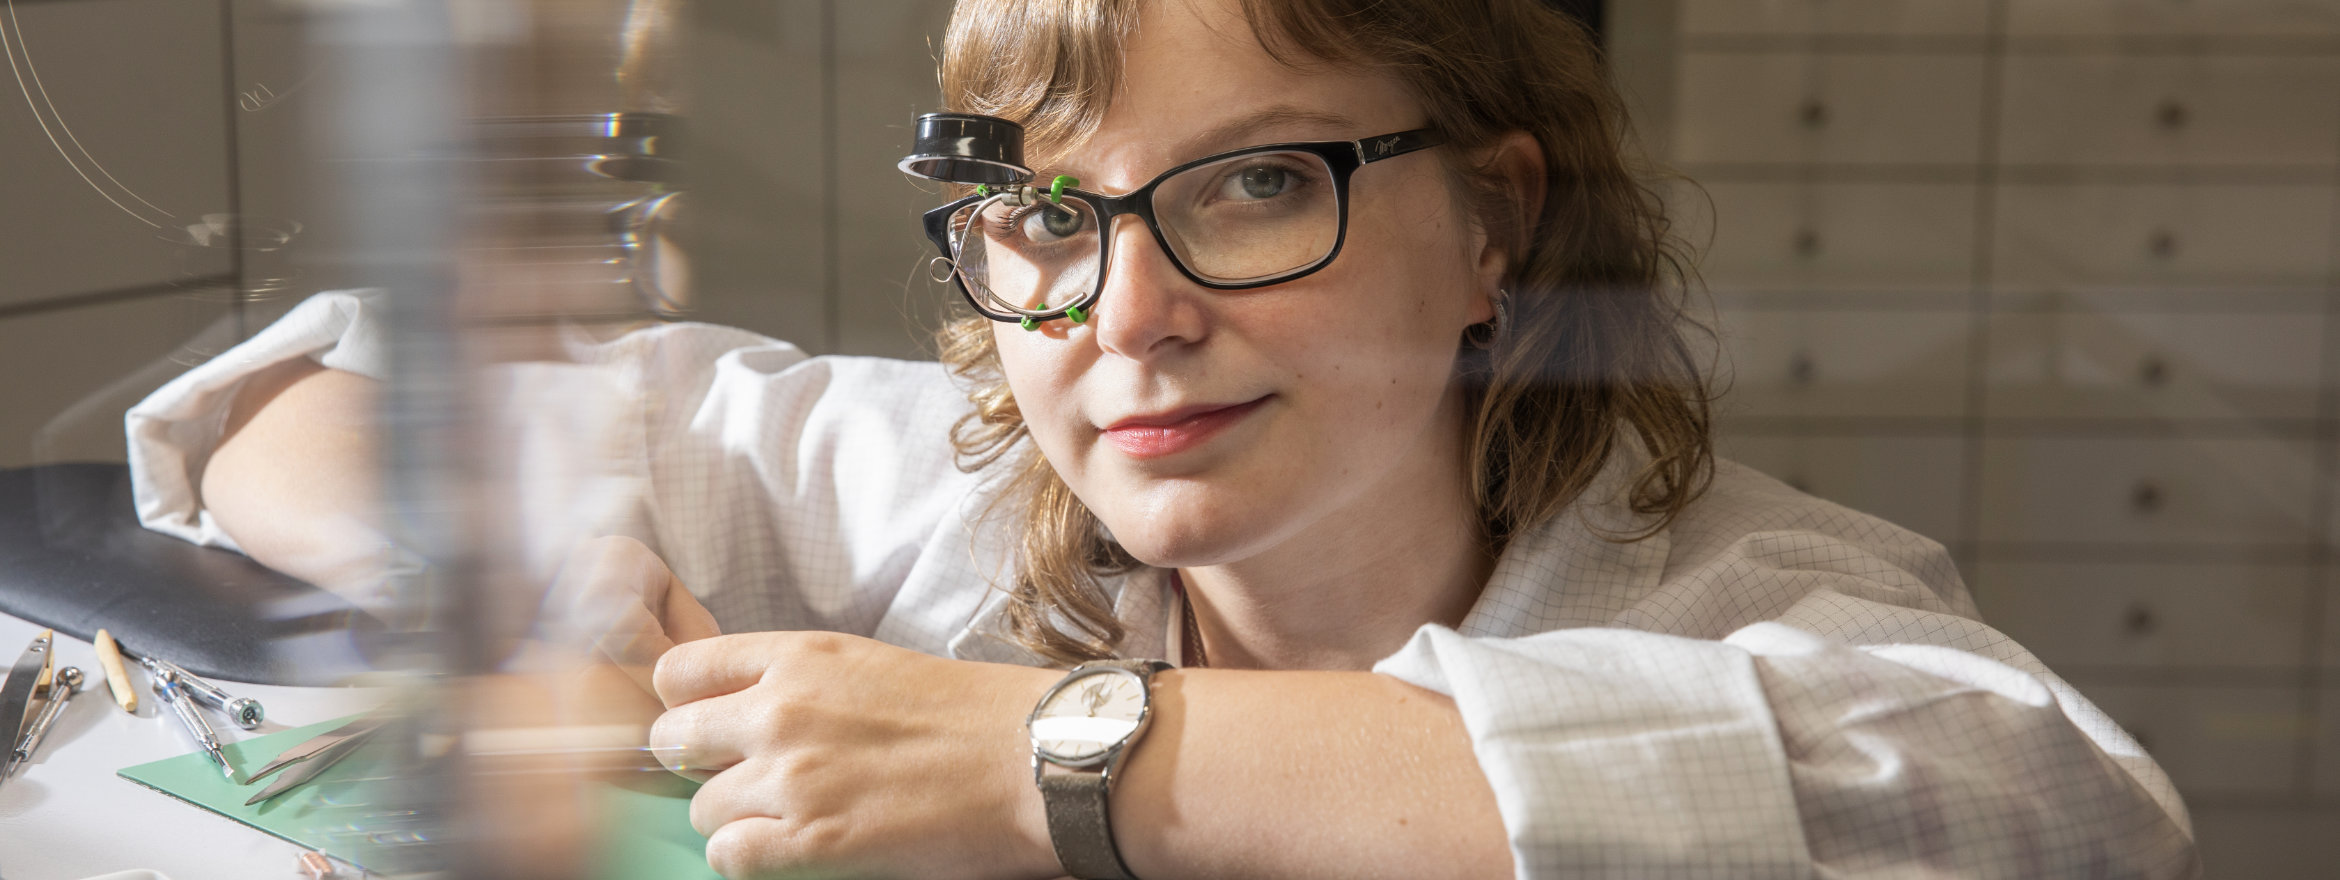 Protected: Interviewing Venla Voutilainen on Her Watchmaking Journey